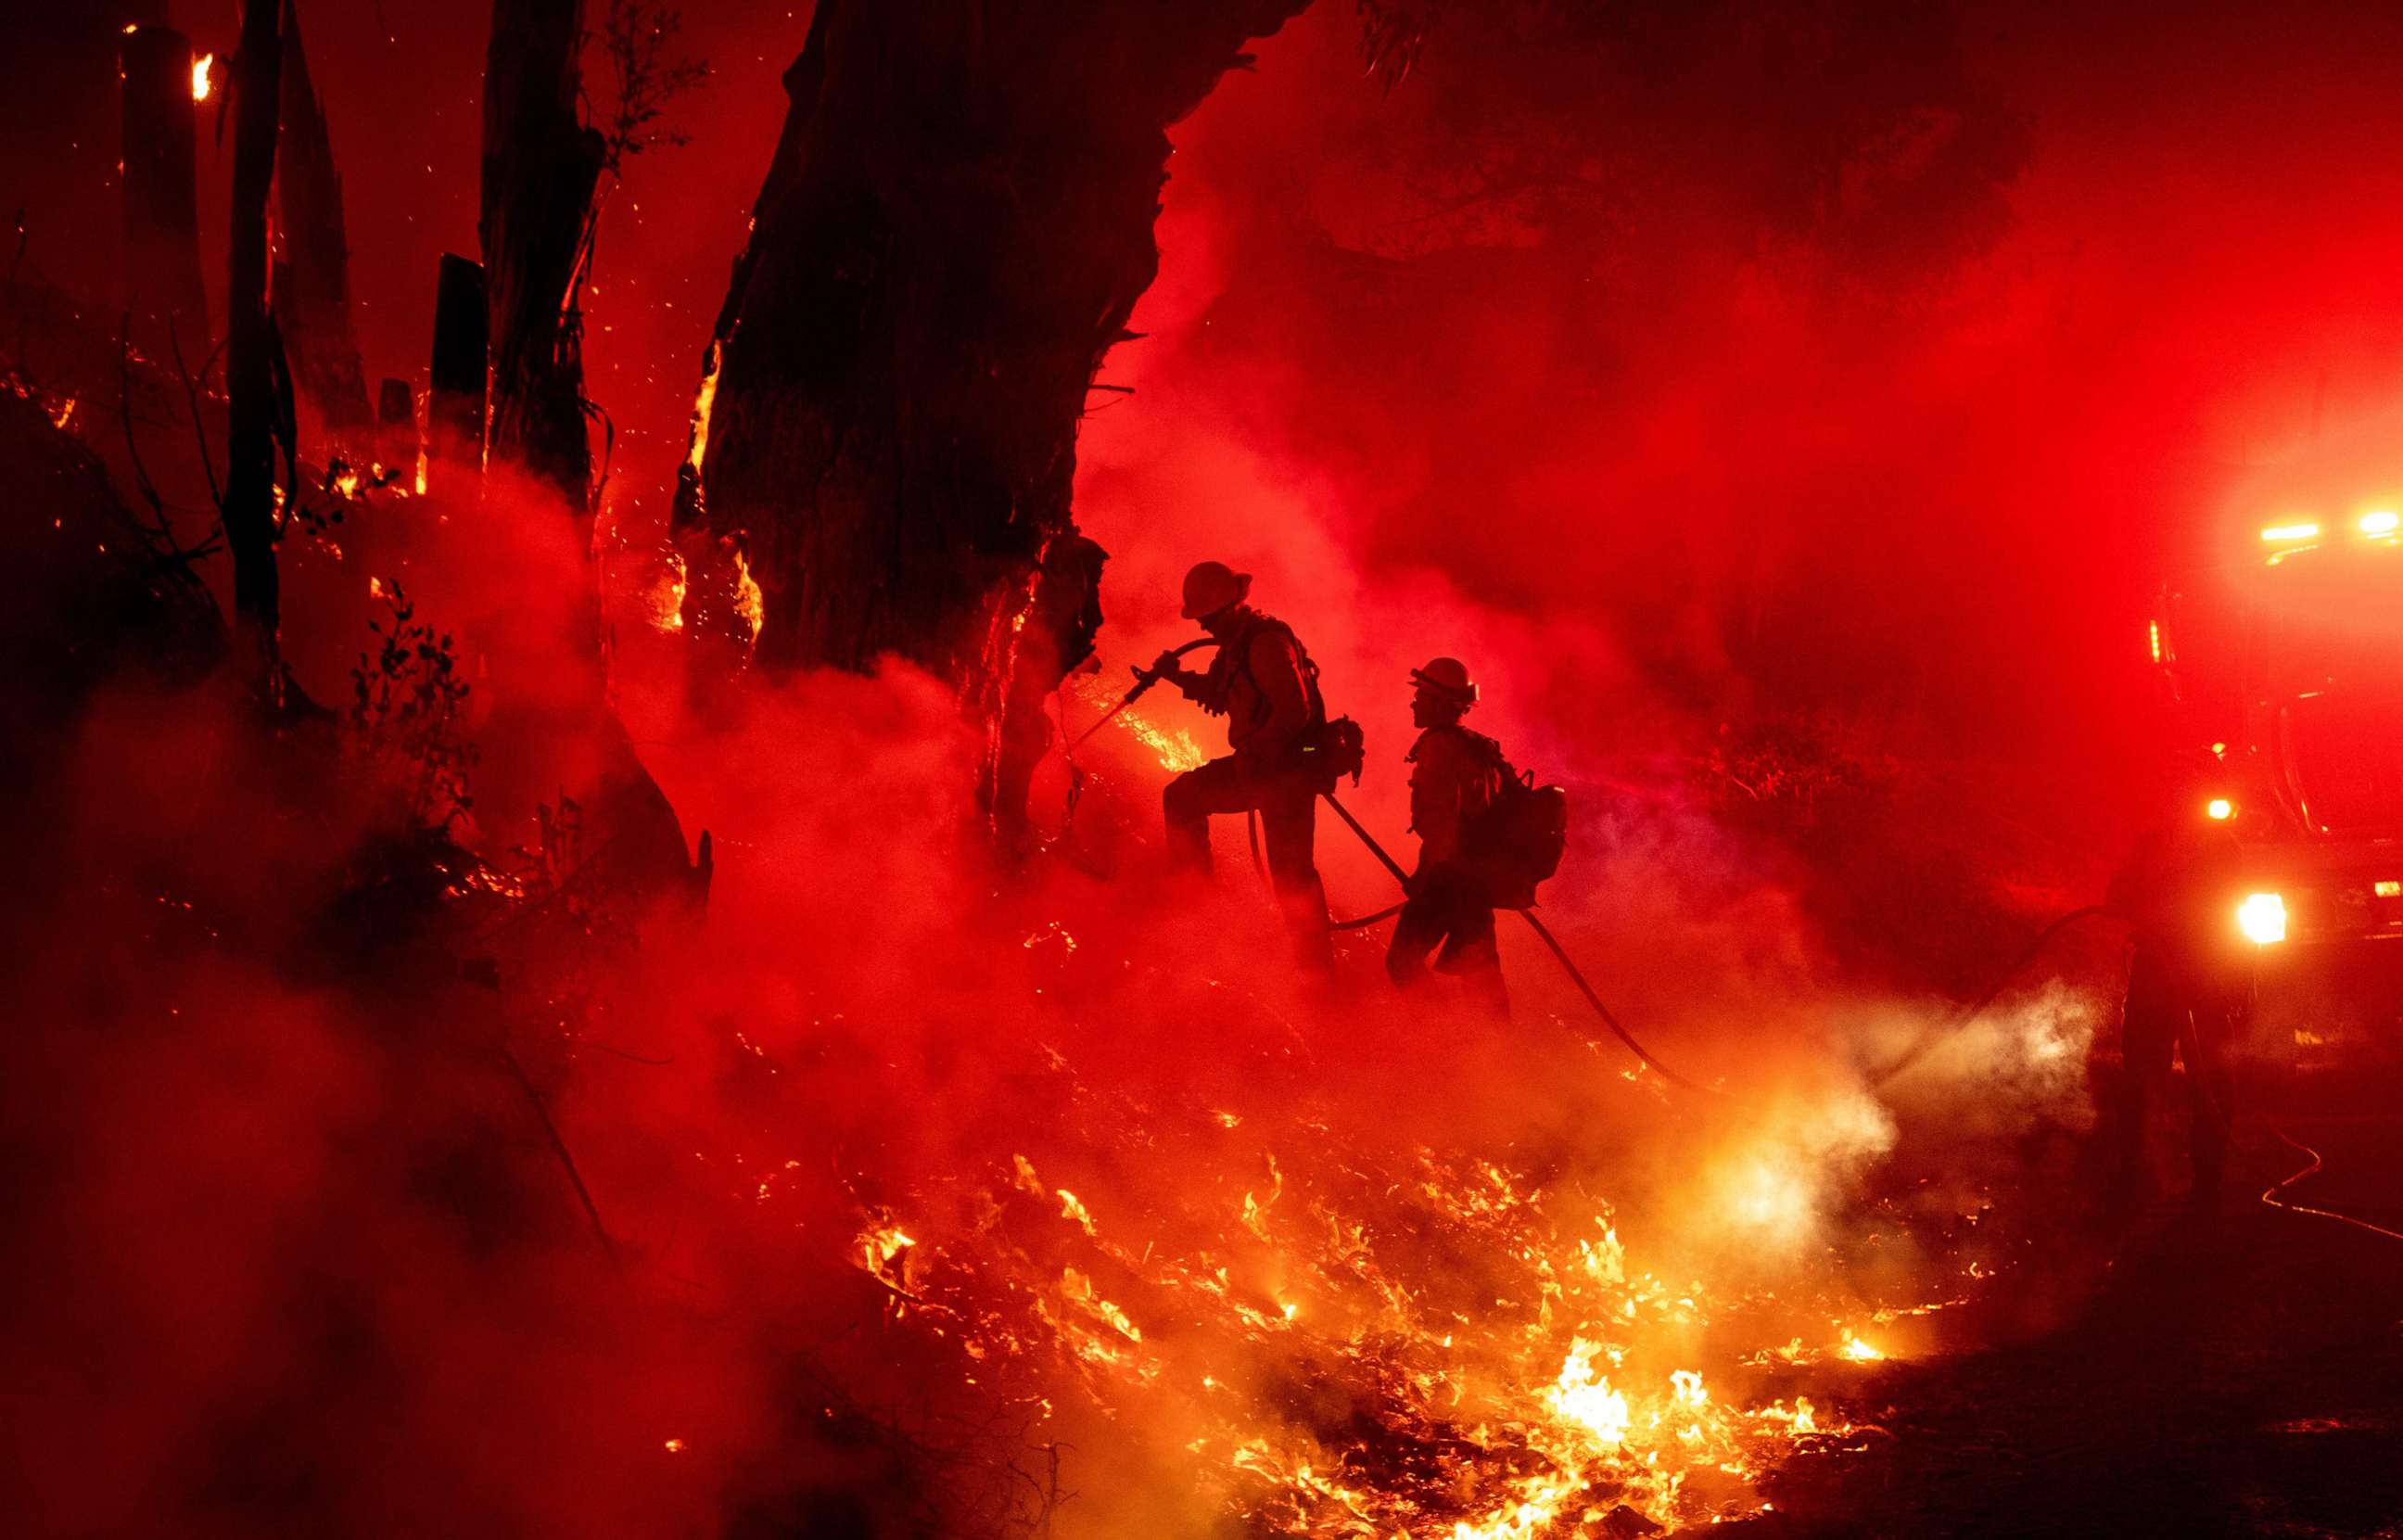 PHOTO: Firefighters work to control flames from a backfire during the Maria fire in Santa Paula, Calif., Nov. 1, 2019.